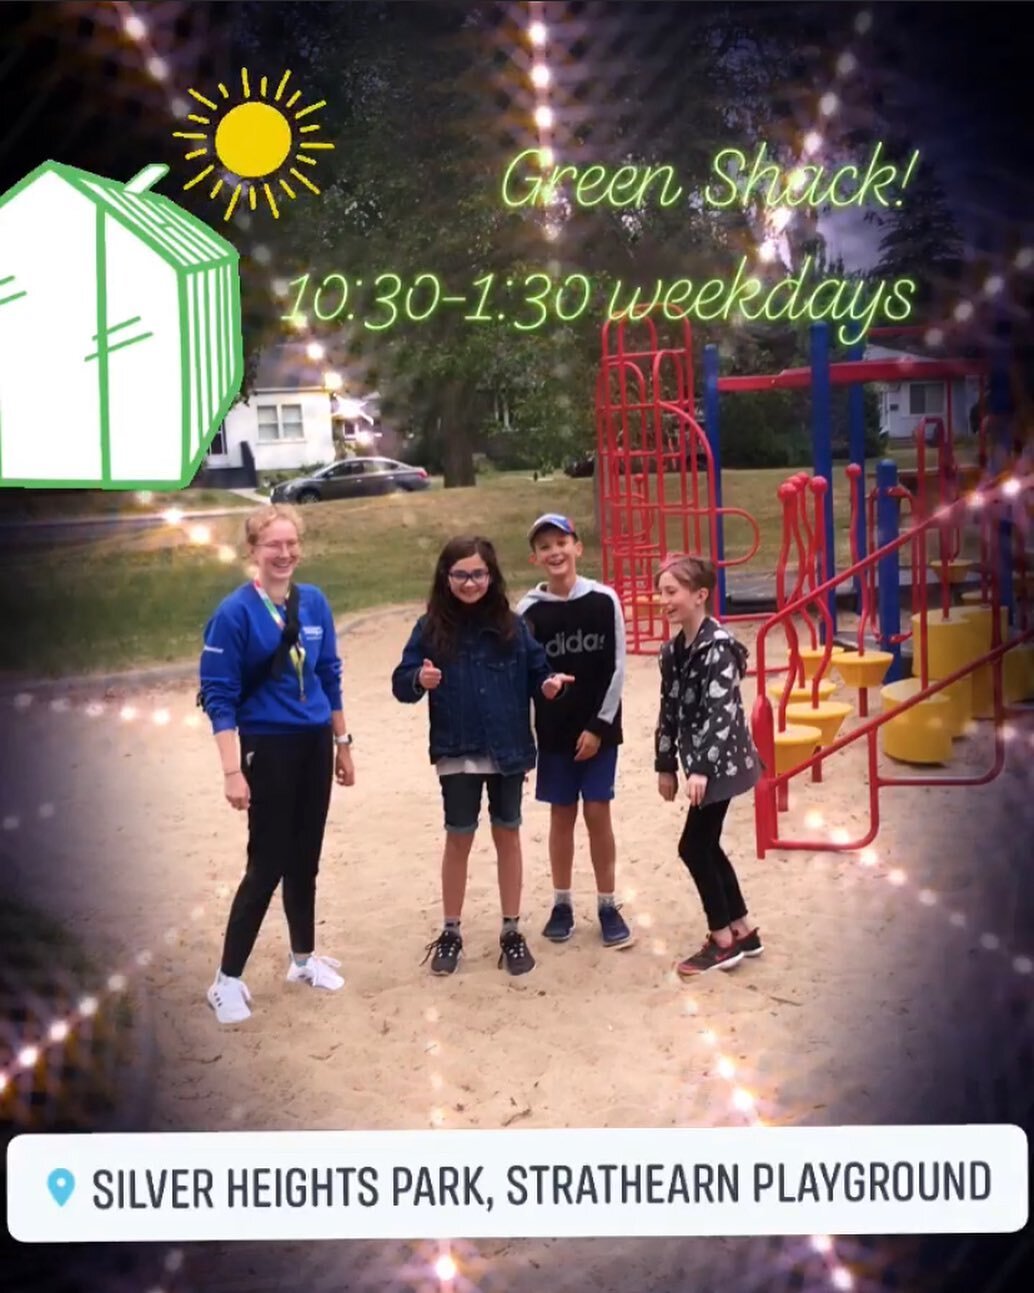 Following some staffing and smoke delays, Strathearn&rsquo;s Green Shack is now officially up and running! Leader Erin is ready to engage kiddos aged 6-12 in a variety of crafts, games and free play on weekdays from 10:30am-1:30pm this summer! Younge